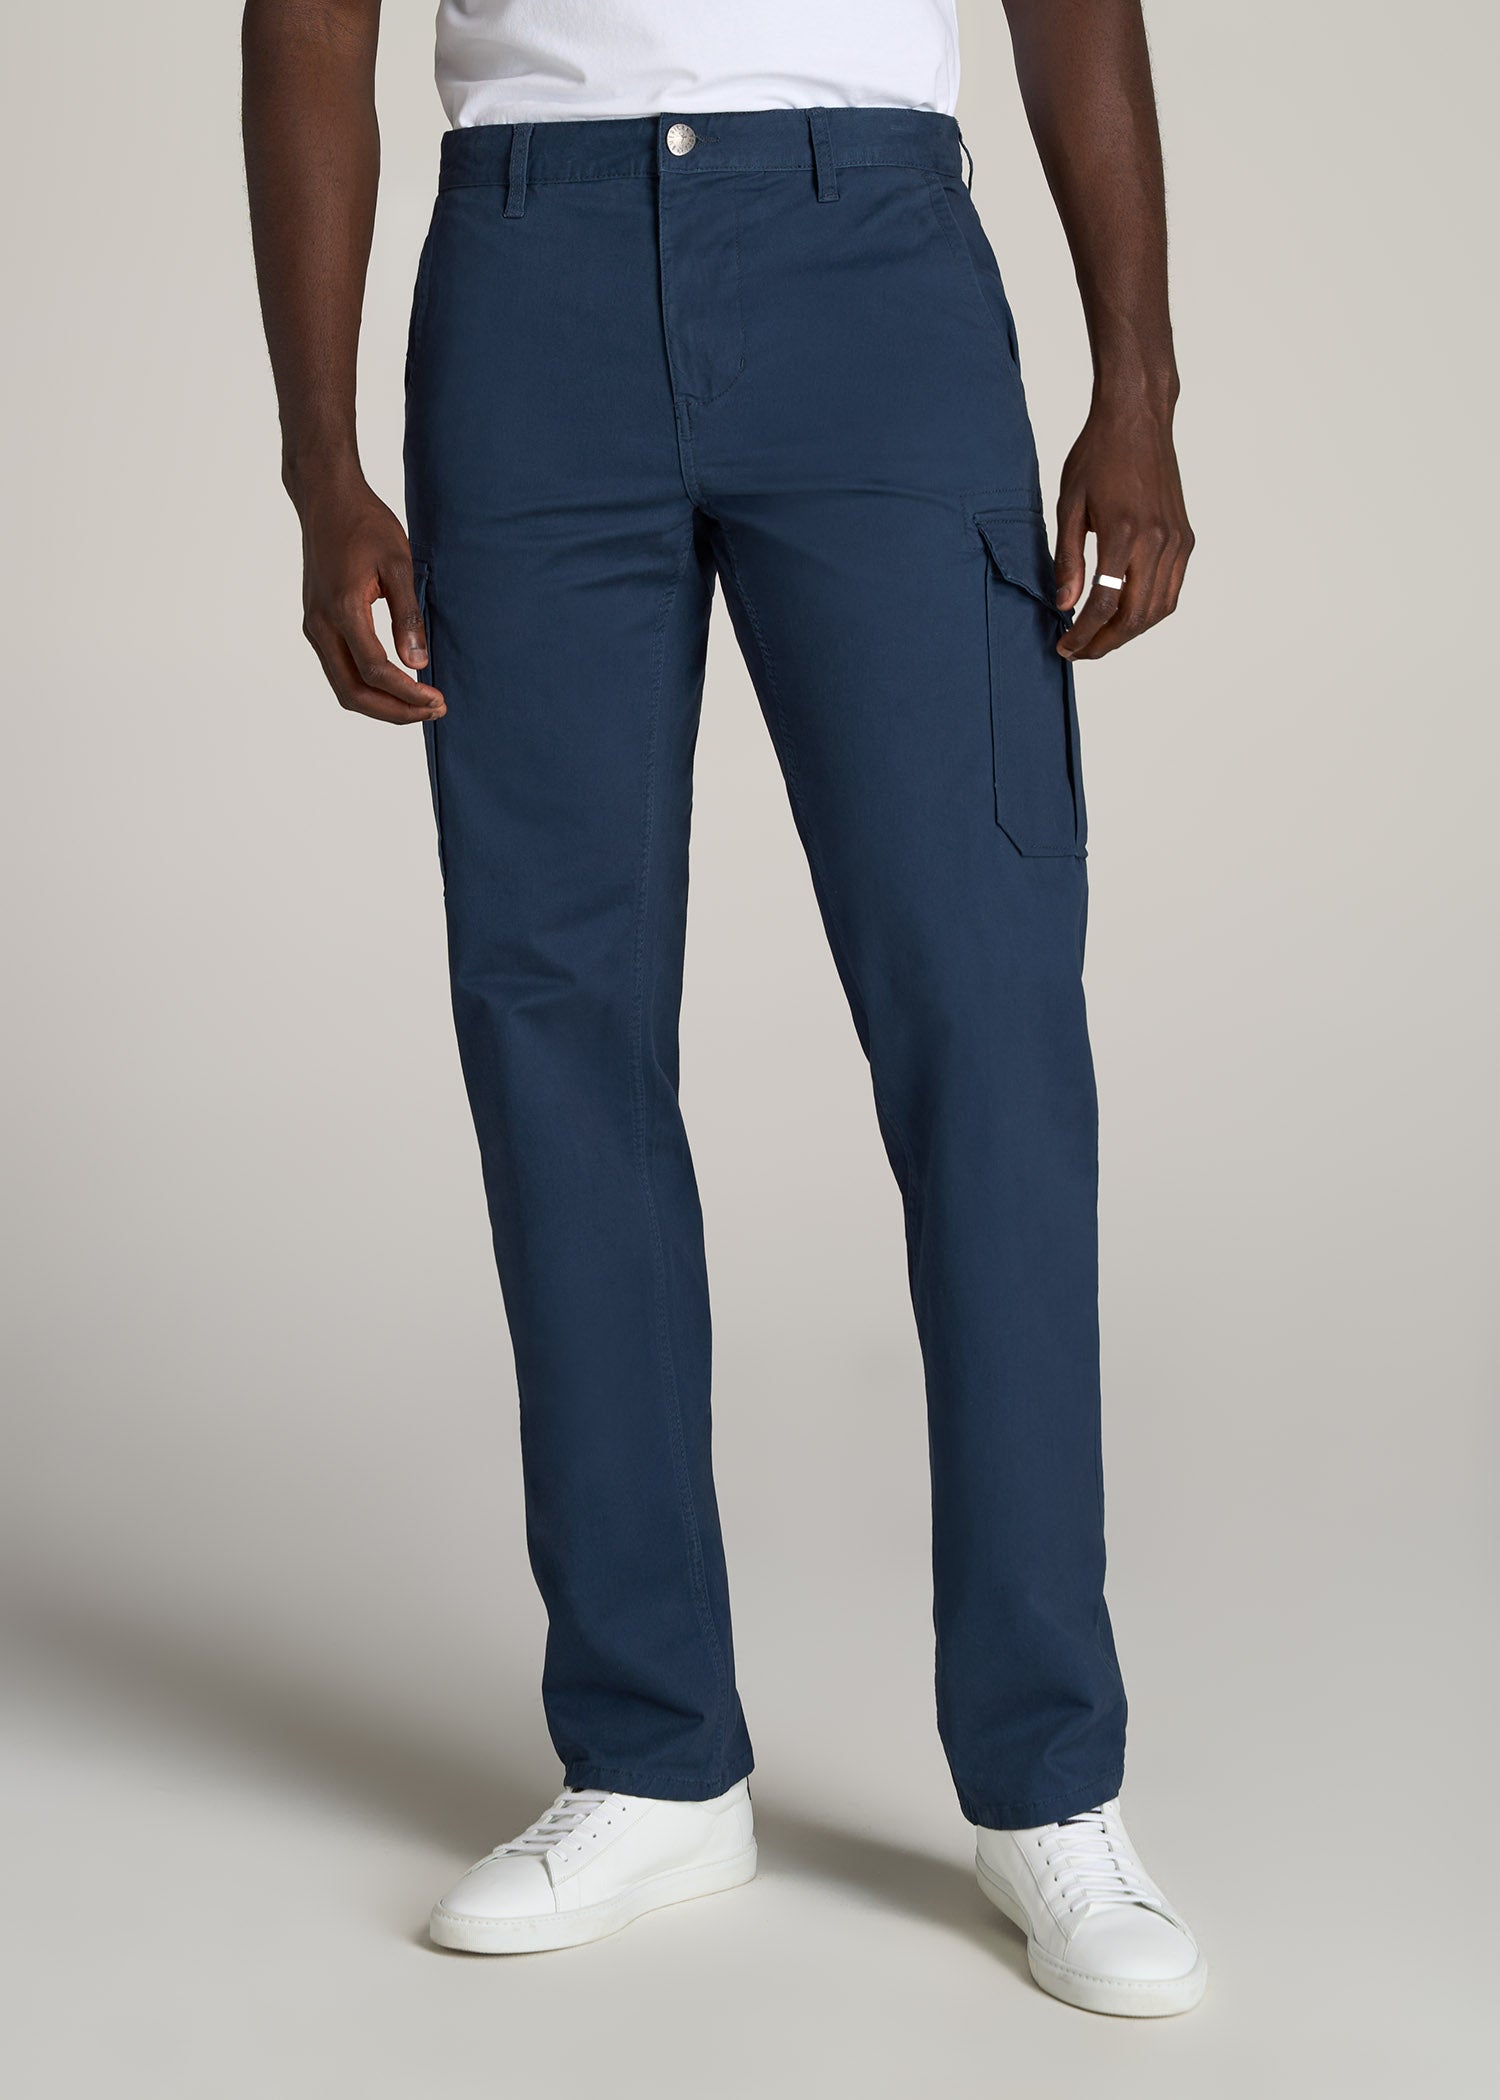       American-Tall-Men-Stretch-Twill-Cargo-Pants-Marine-Navy-front